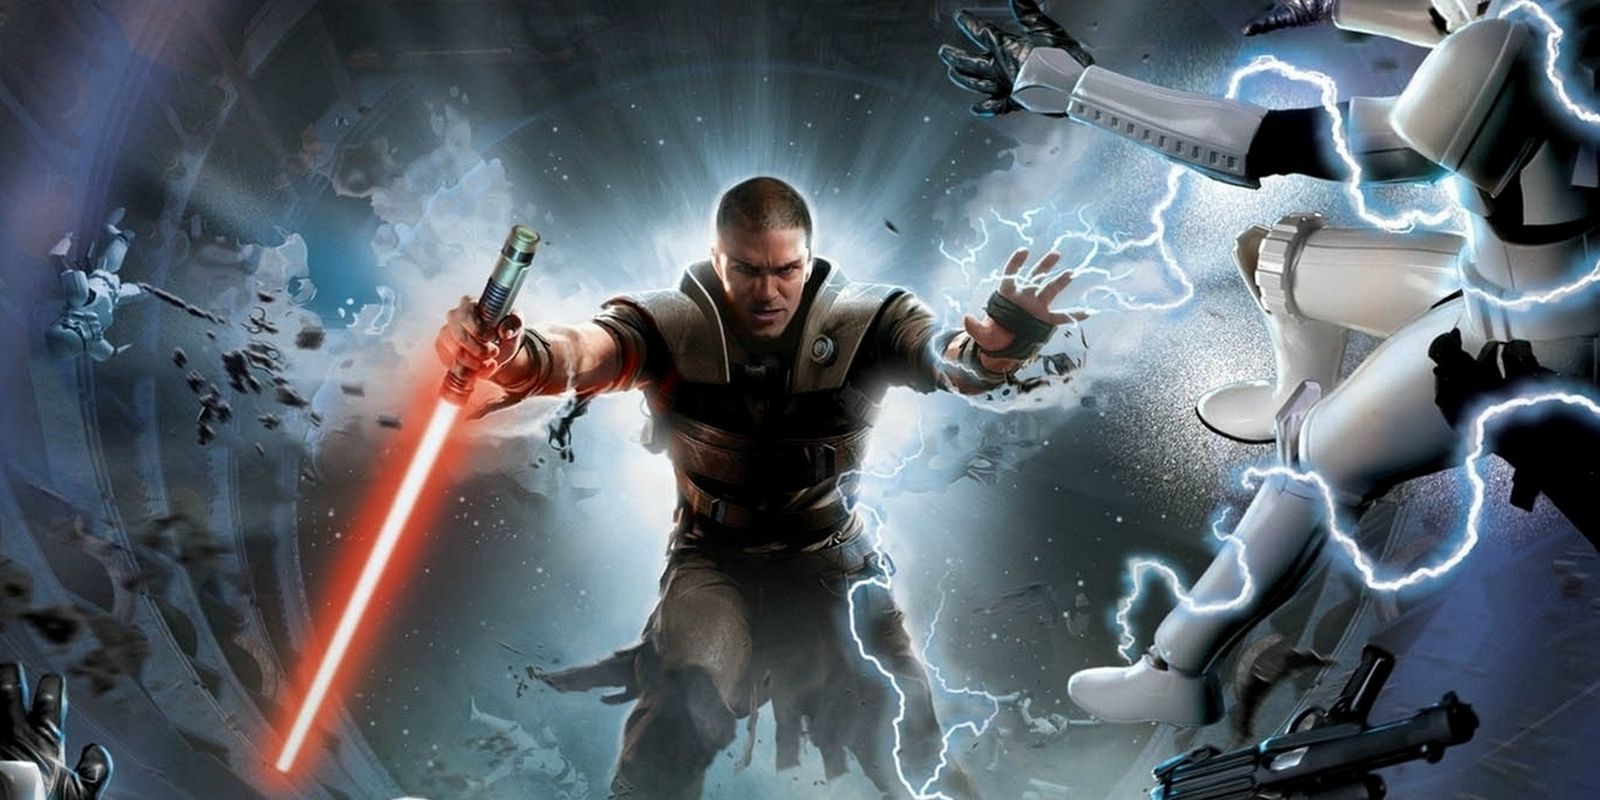 Key art for Star Wars: The Force Unleashed showing main character Starkiller holding a red lightsaber, and sending Stormtroopers flying and covered in lightning with the Force.